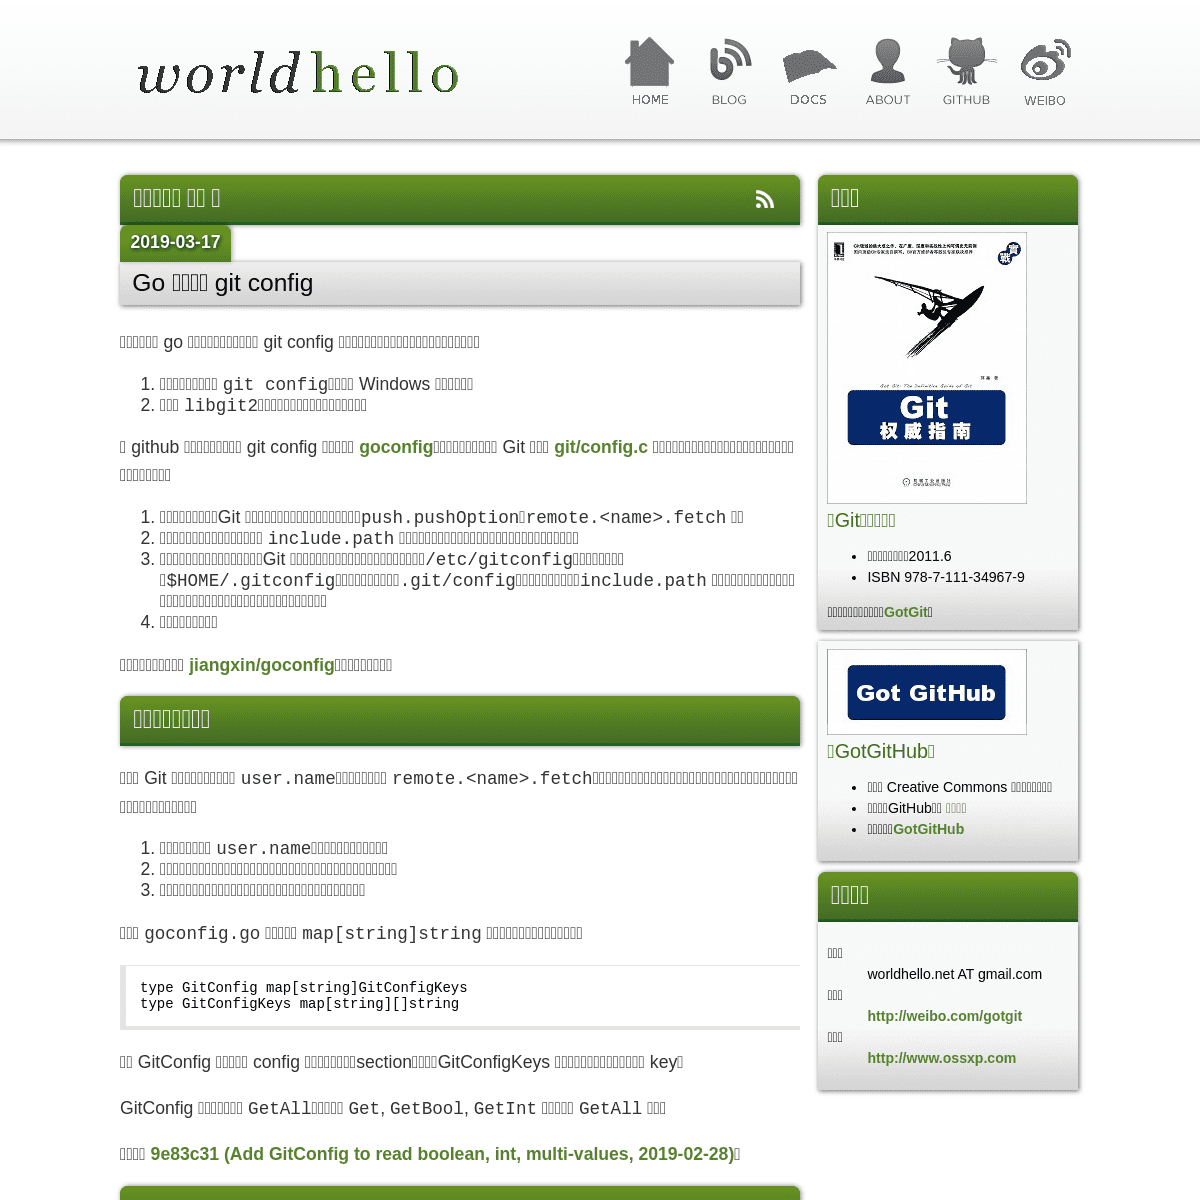 A complete backup of https://worldhello.net